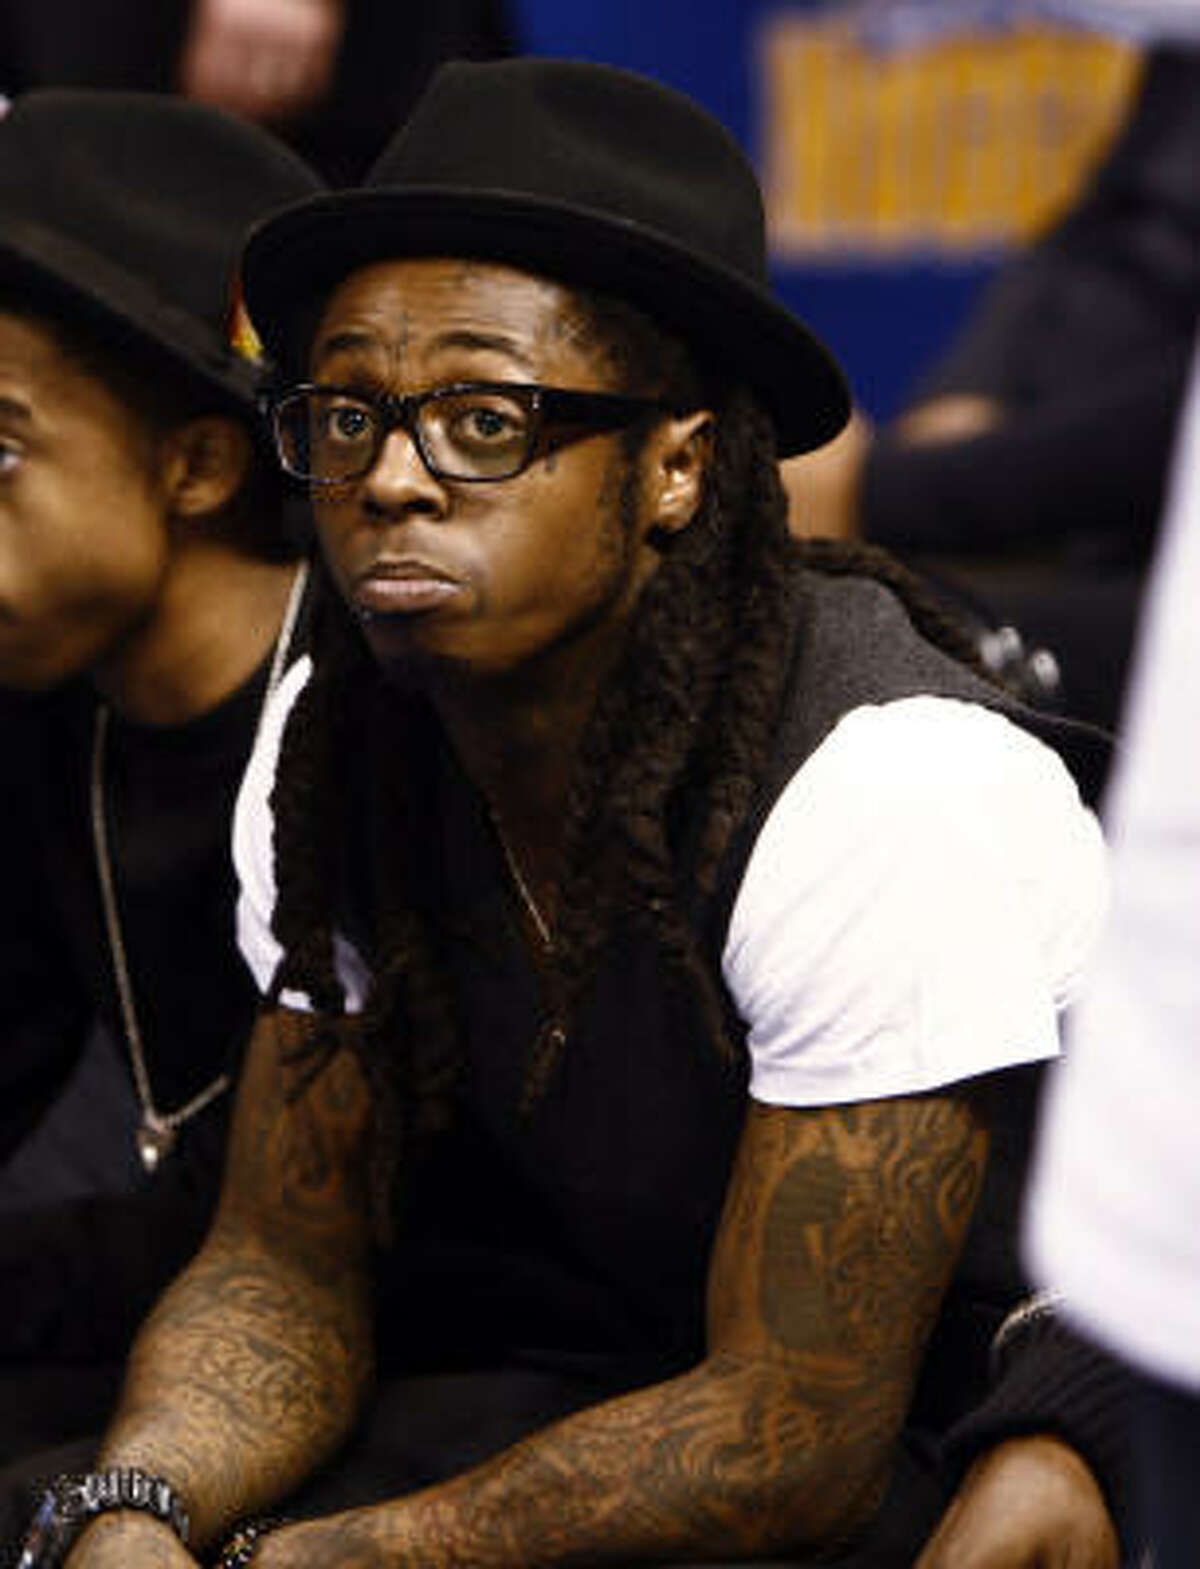 Now we see Lil' Wayne still with his watch, but looking a little more humble.